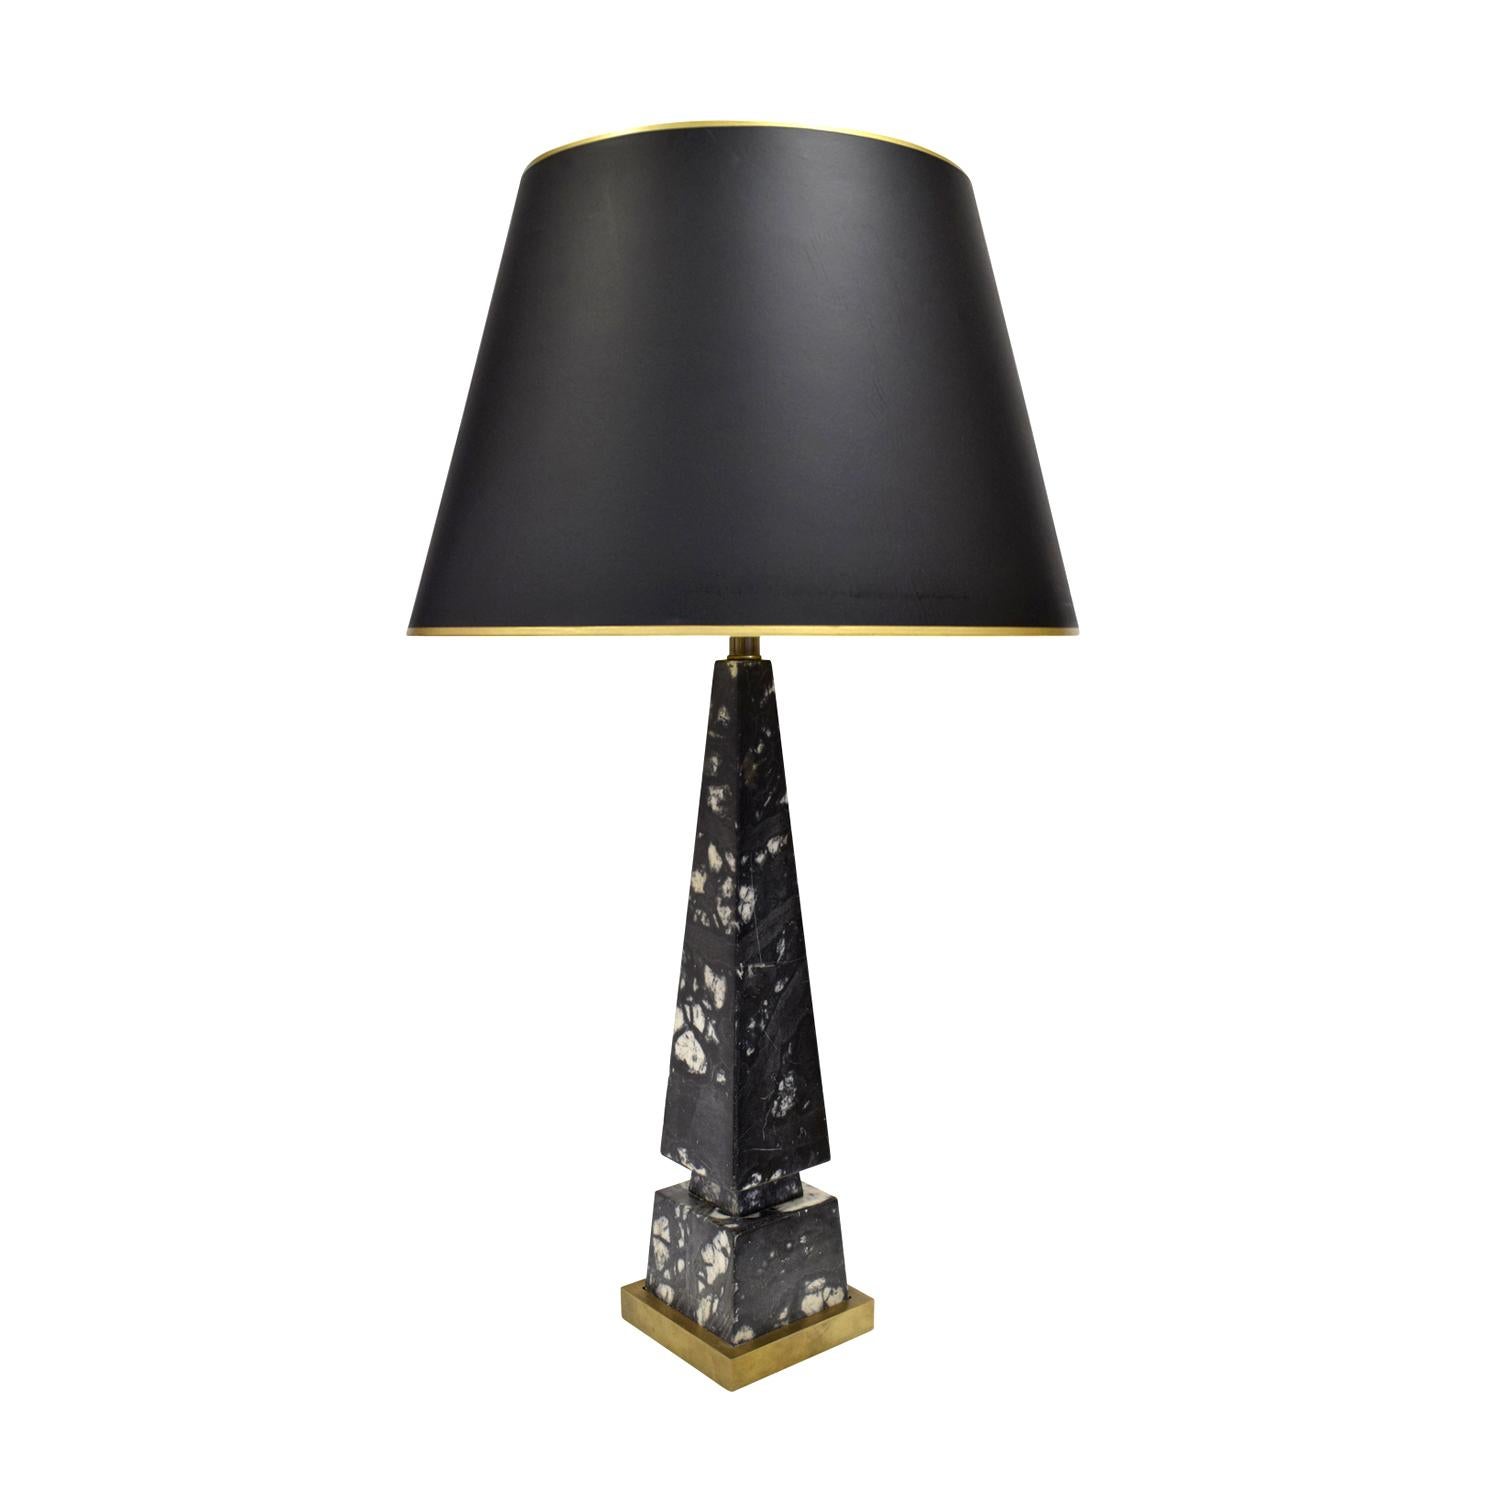 Elegant table lamp, obelisk form in black and white figured marble with bronze base and hardware, American 1940's.

Measures: Shade diameter 18 inches 
Shade height 12.5 inches.